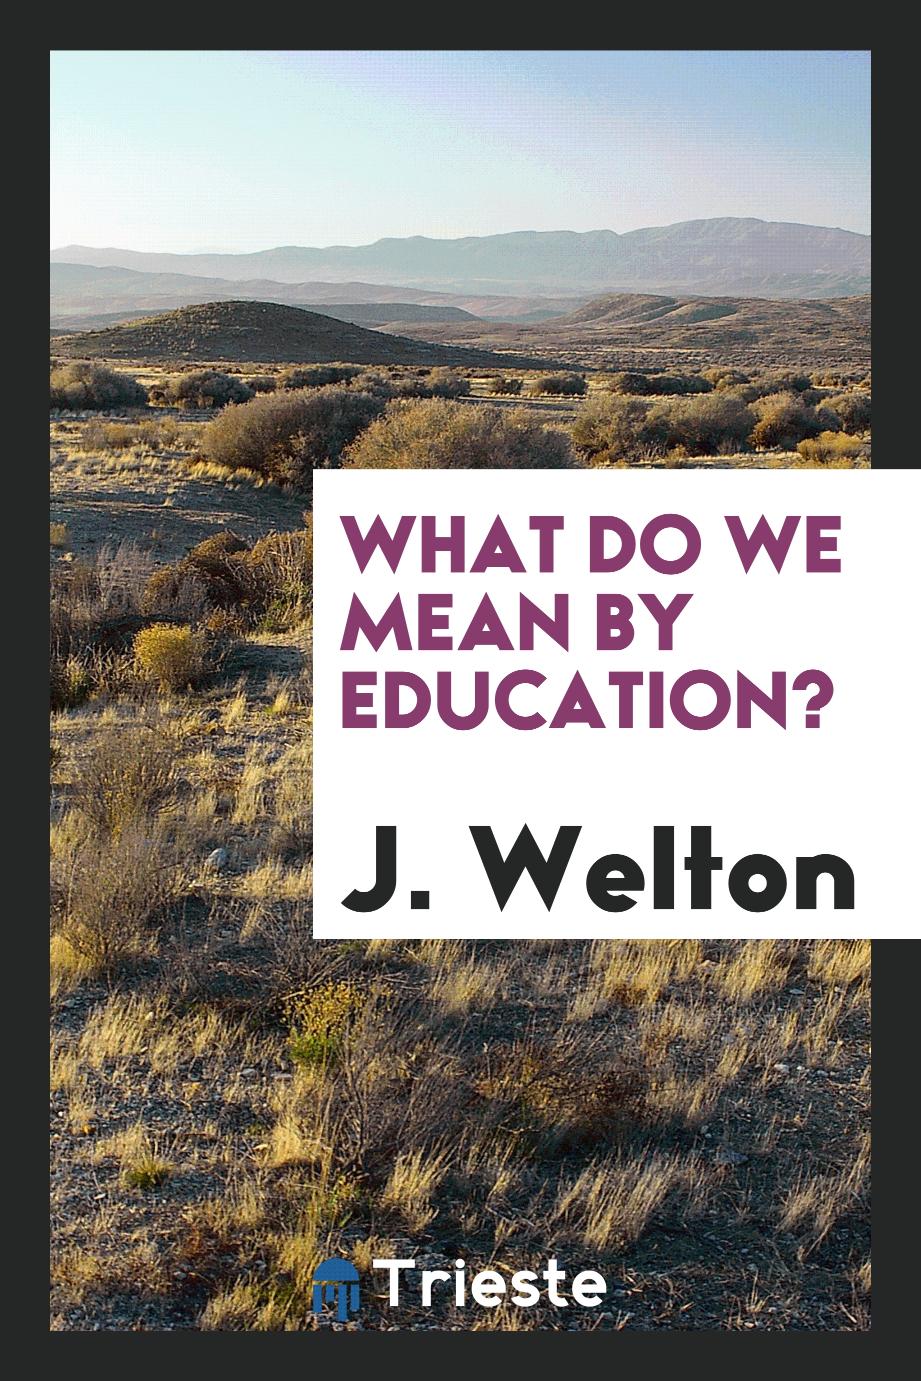 What do we mean by education?